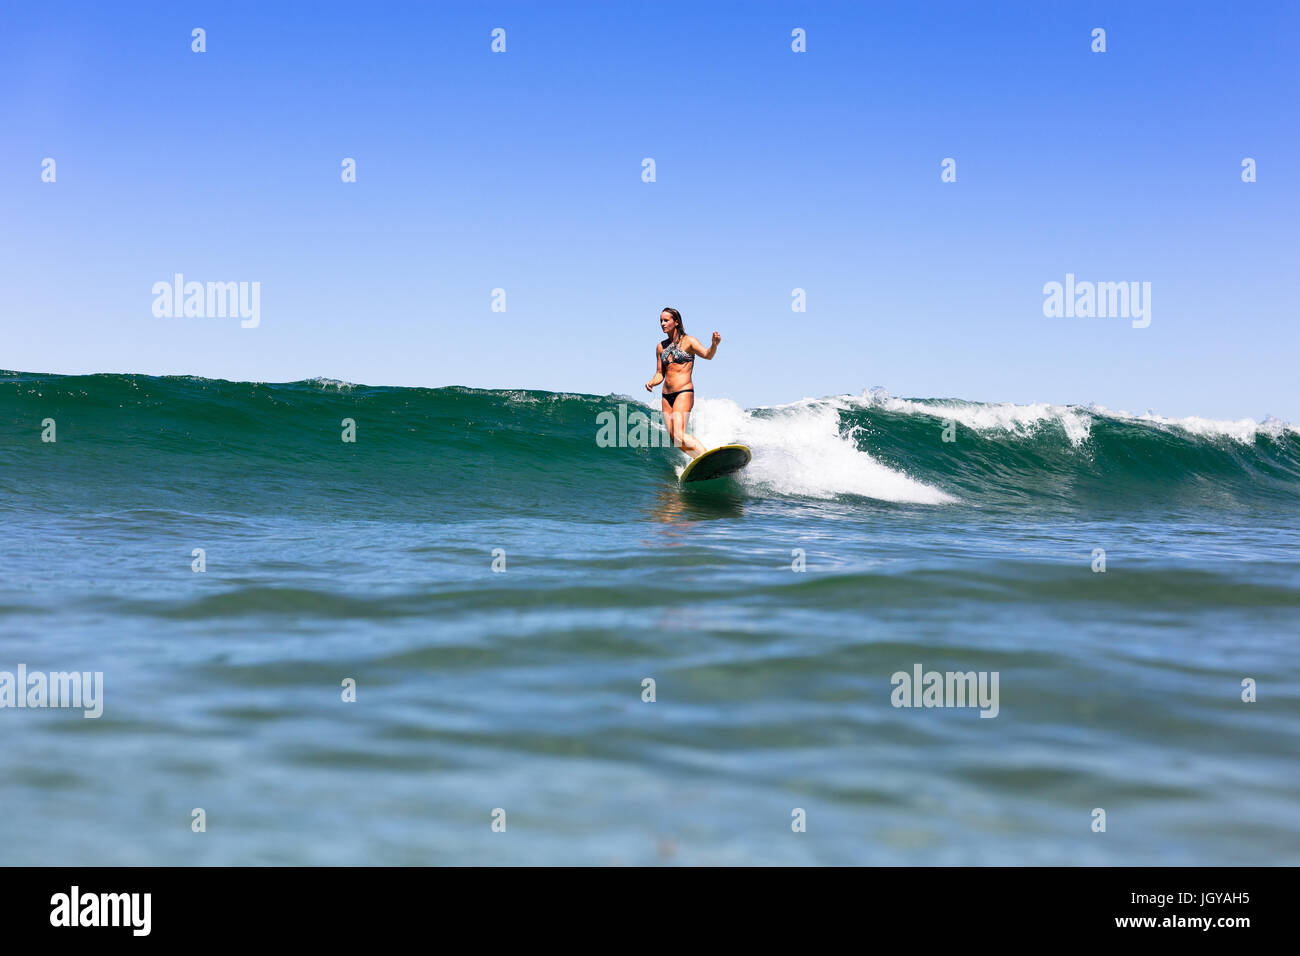 A young girl surfing stylishly on a longboard in tropical water in Australia. Stock Photo